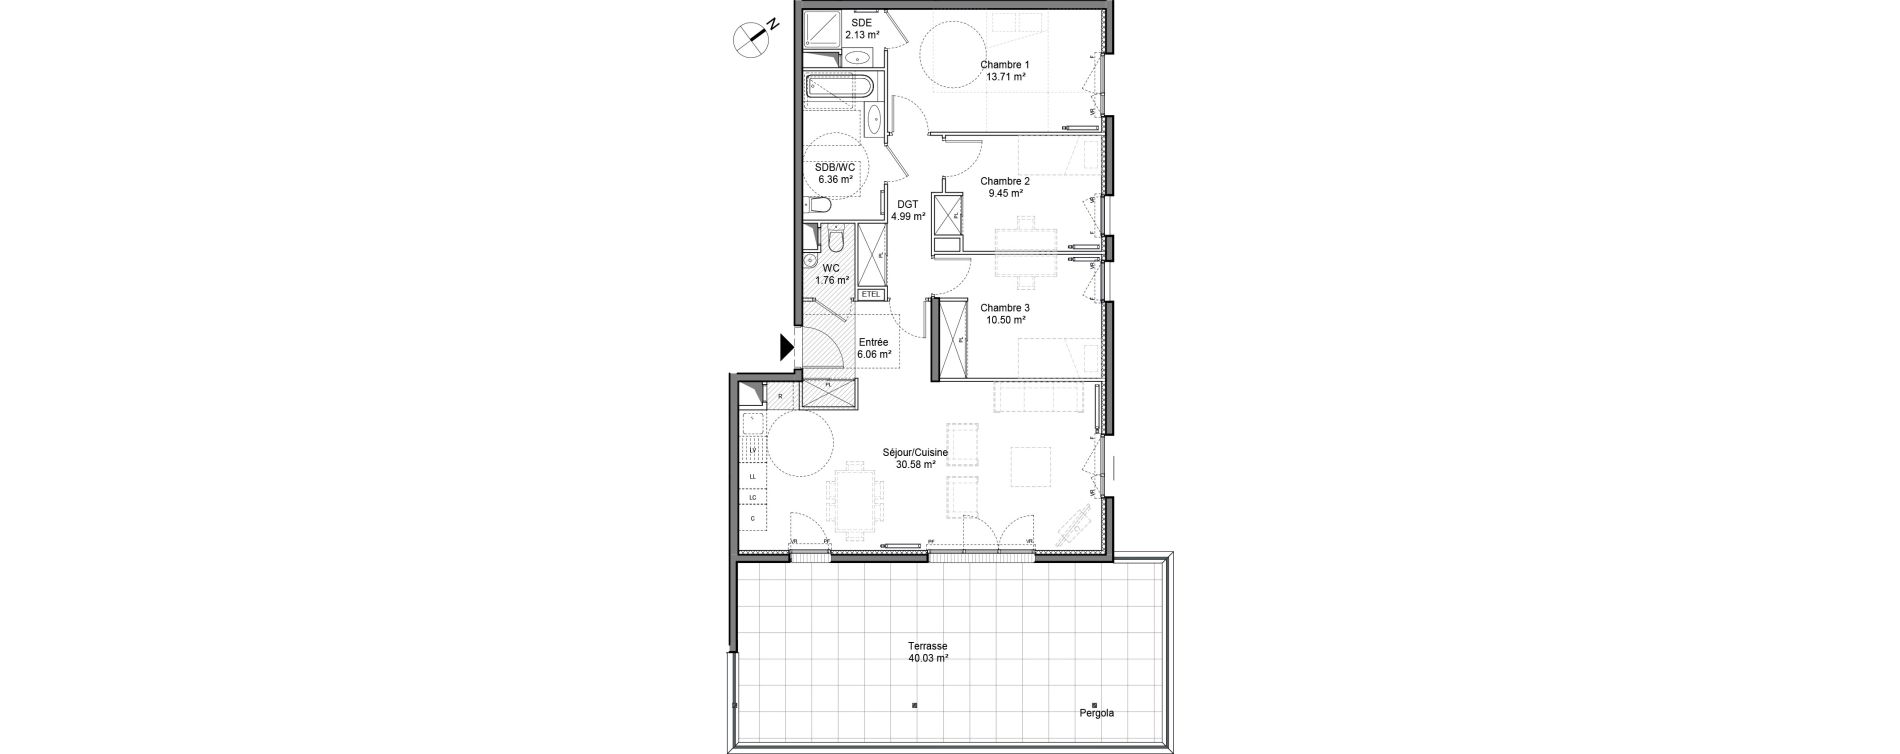 Appartement T4 de 85,54 m2 &agrave; Ch&acirc;tenay-Malabry Chatenay malabry voltaire